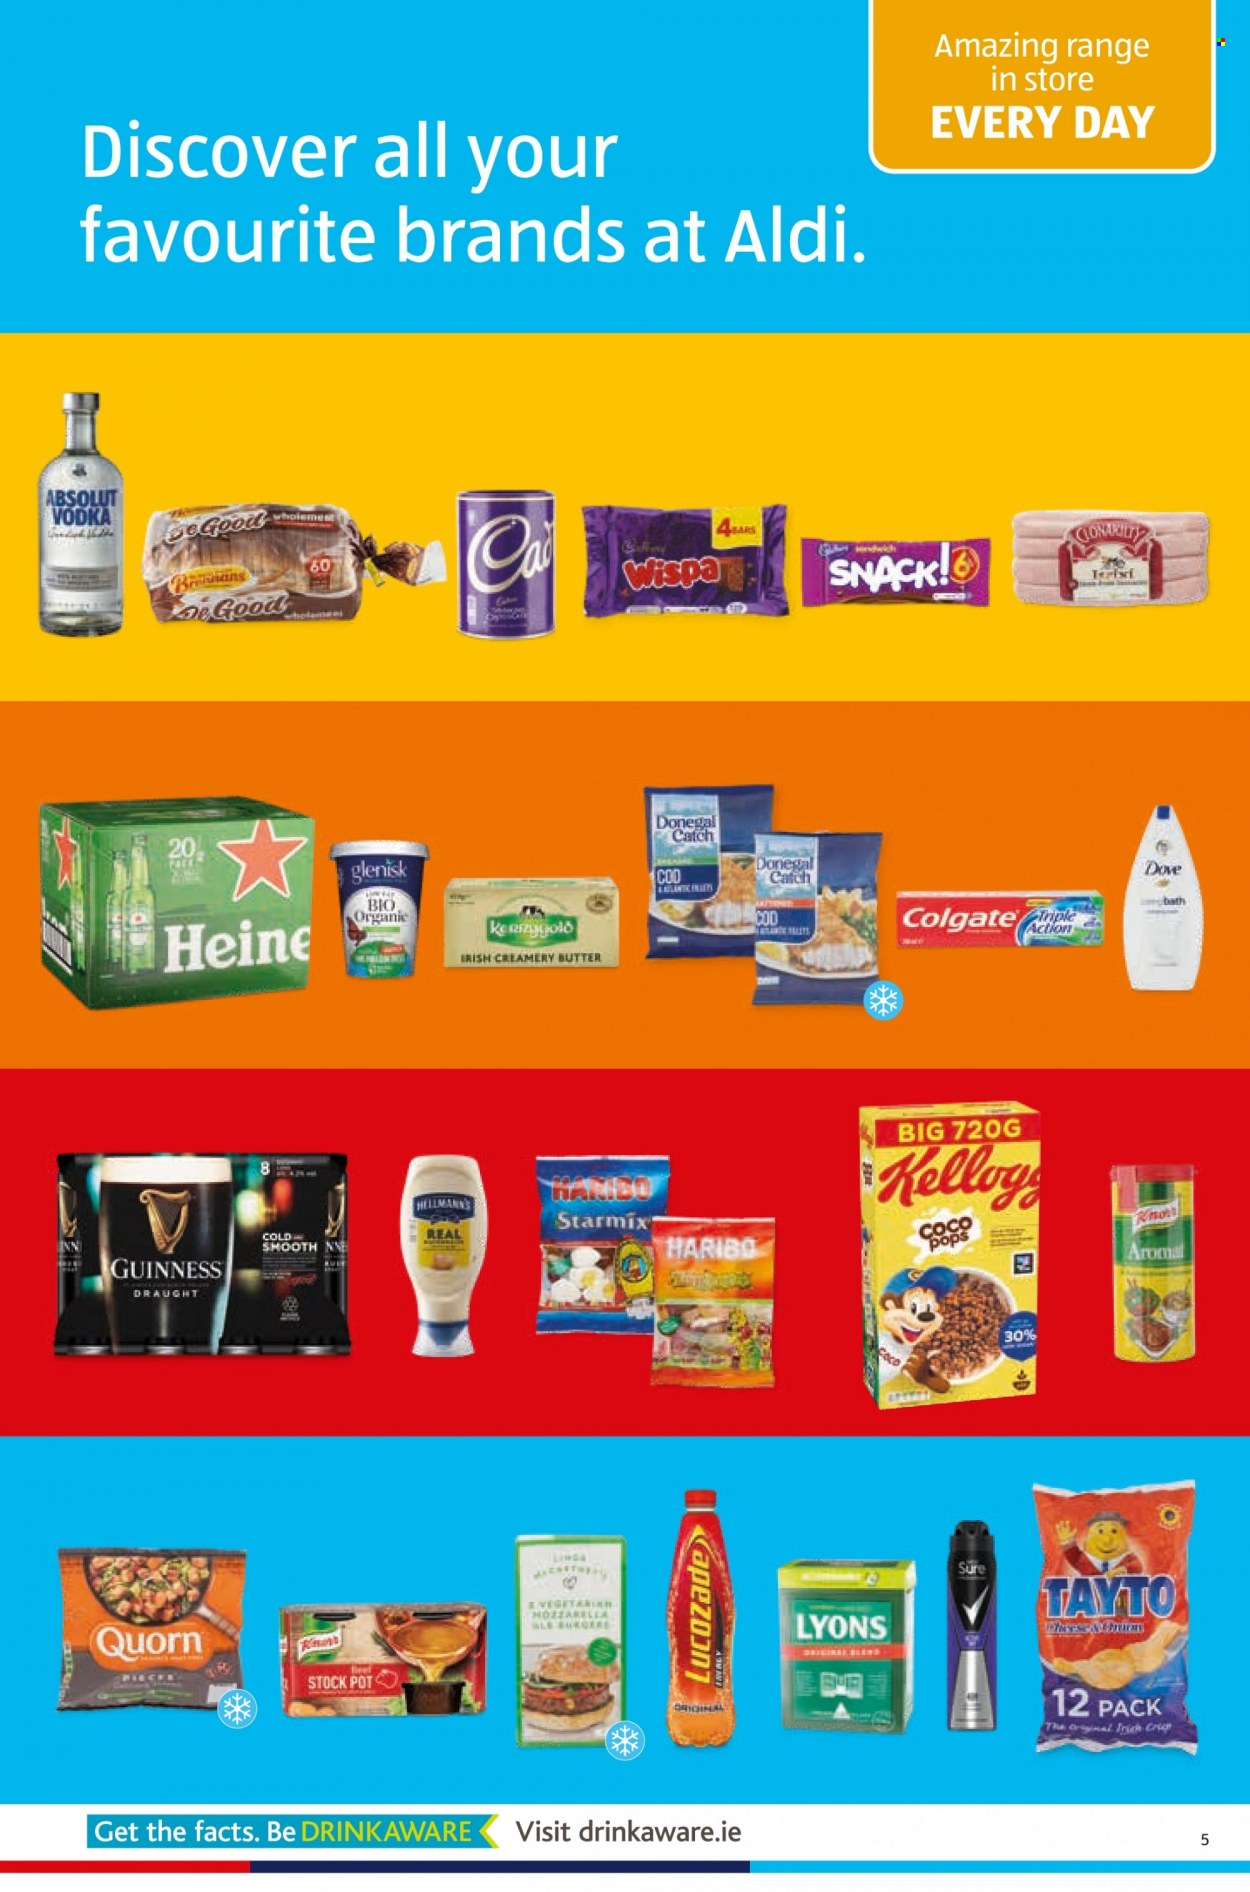 thumbnail - Aldi offer  - 06.10.2022 - 12.10.2022 - Sales products - cod, butter, Hellmann’s, Donegal Catch, Dove, snack, Haribo, Tayto, coco pops, stockpot, Lyons, vodka, Absolut, Guinness, Colgate, pot. Page 5.